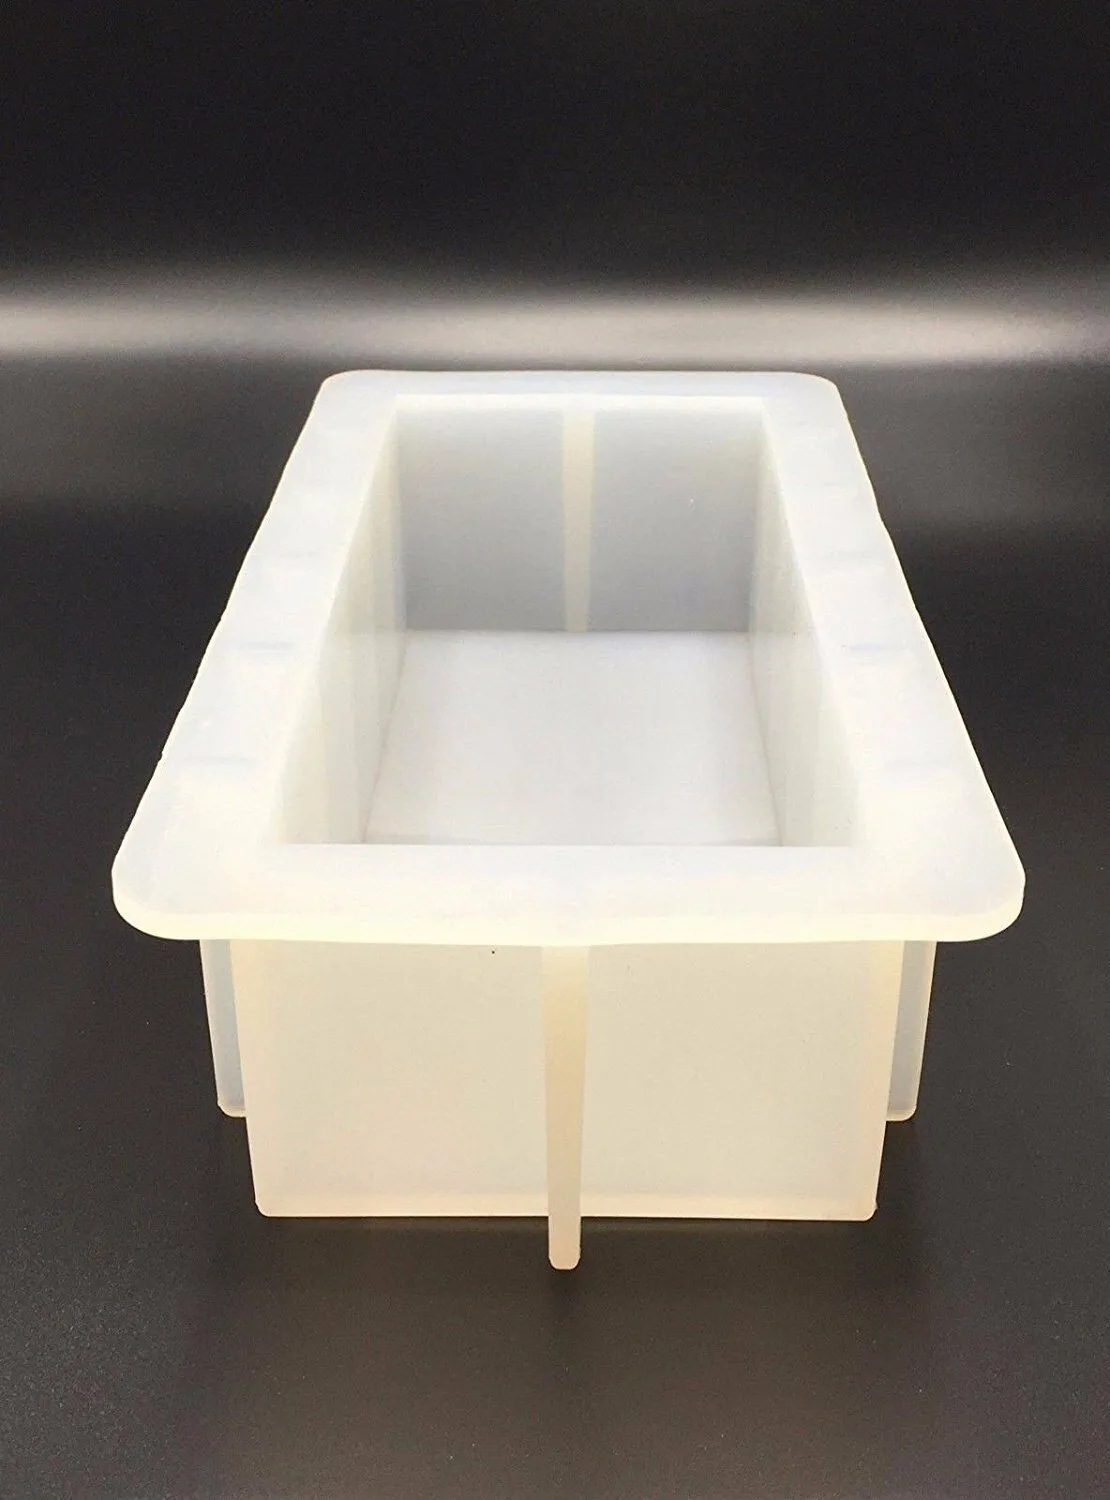 BAKER DEPOT 500ML Silicone Mold for Handmade Soap Mold Toast Mold